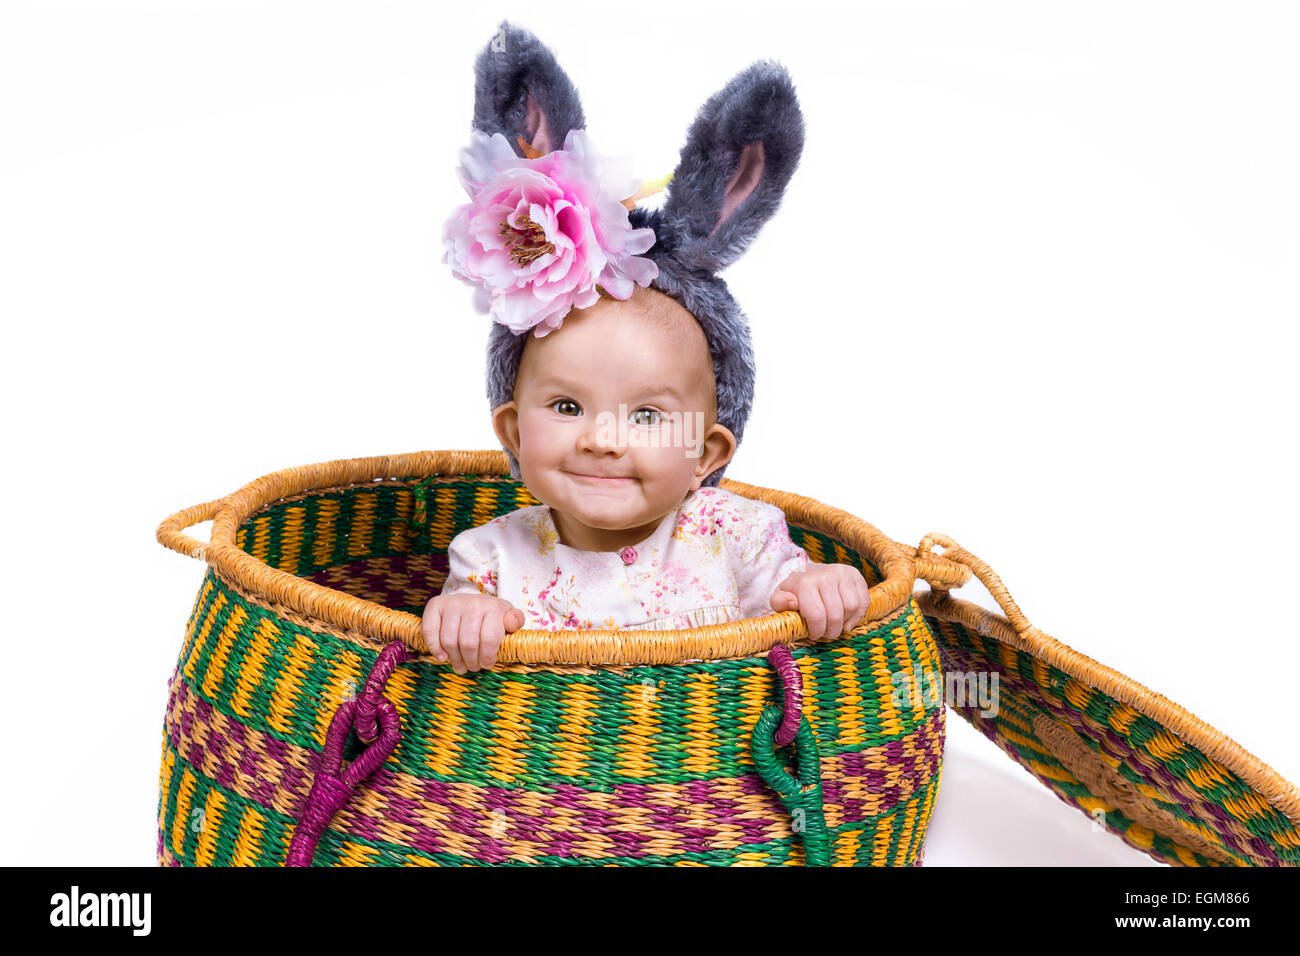 funny baby wearing bunny ears sitting in a basket Stock Photo